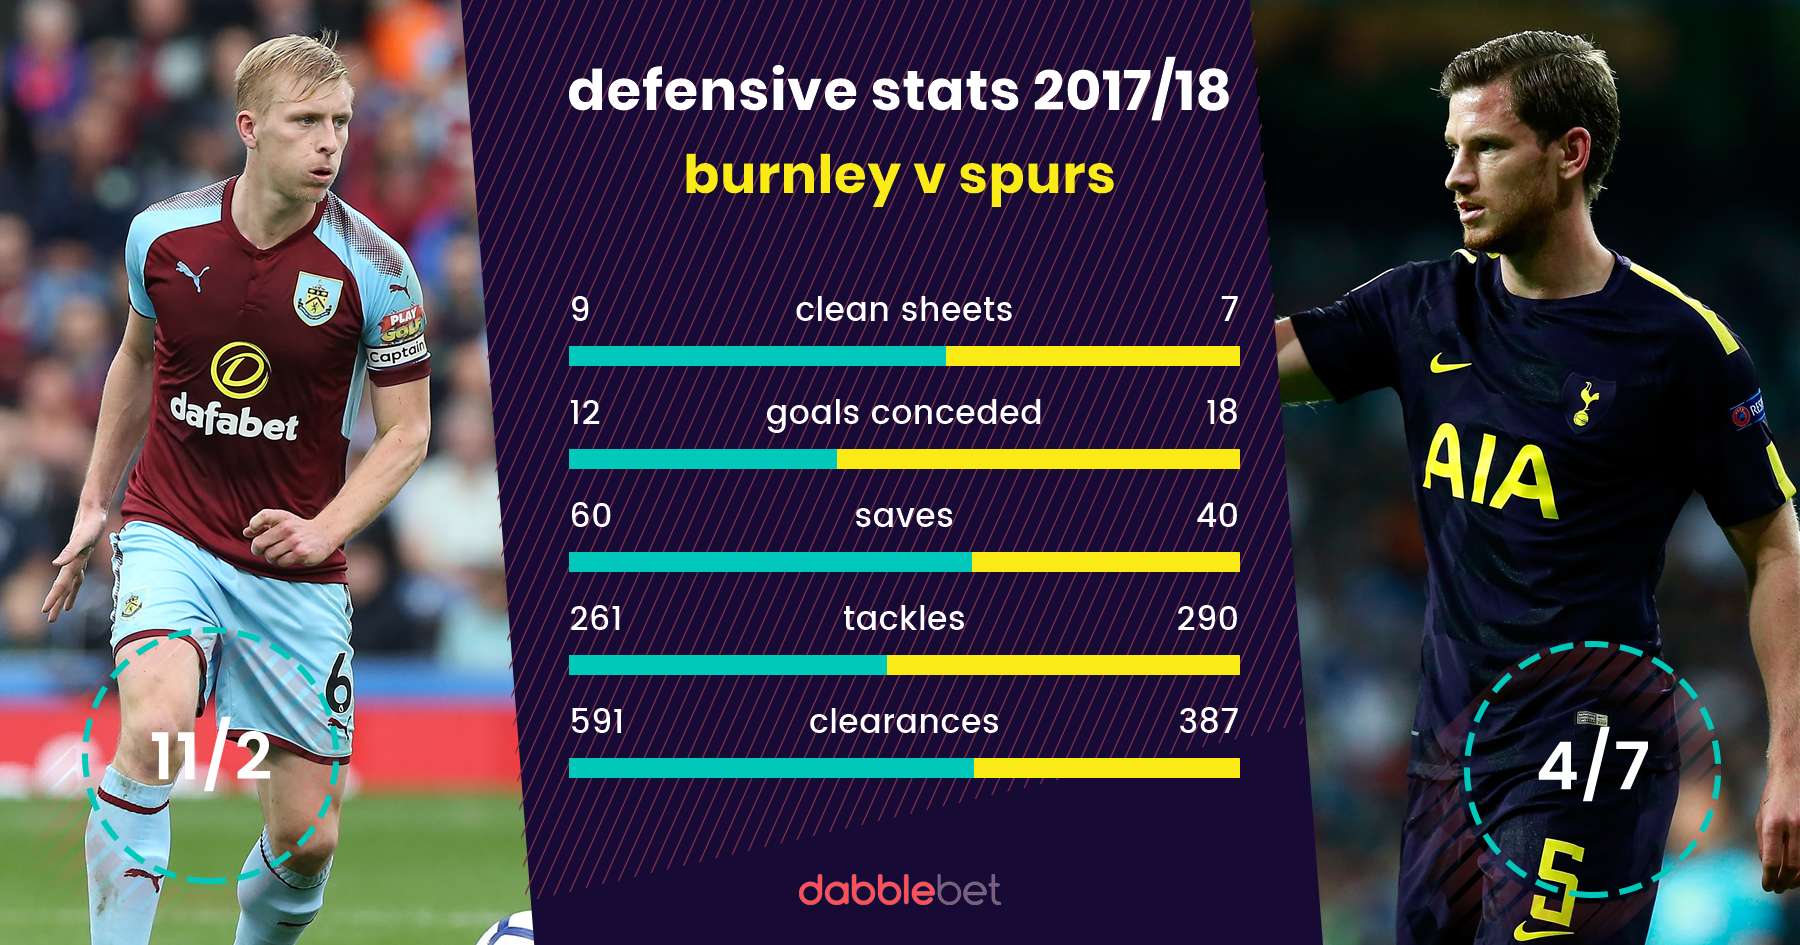 Burnley Spurs graphic